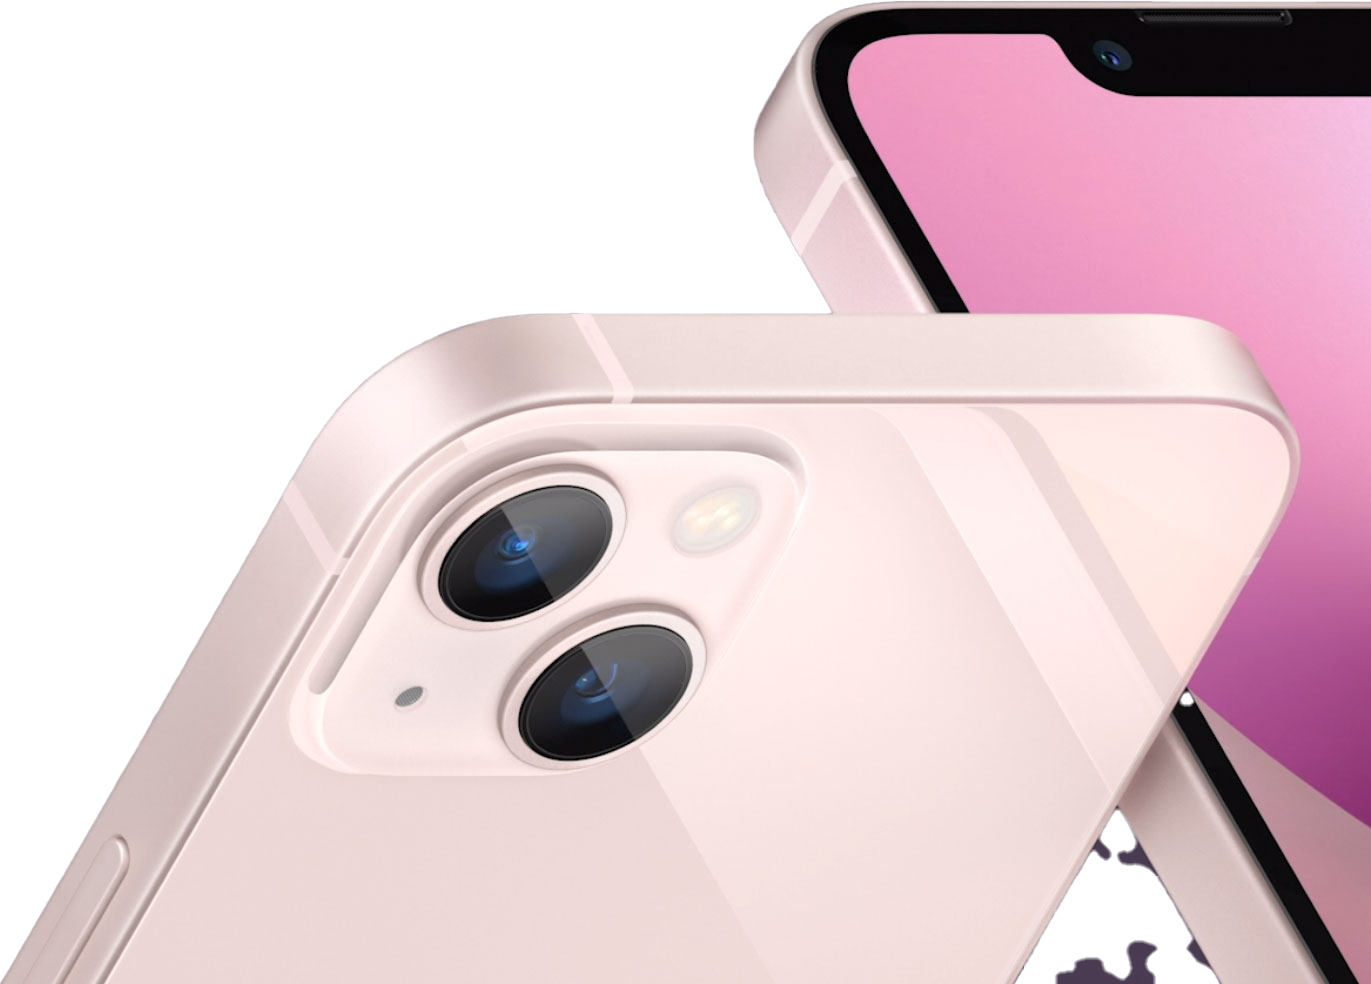 Iphone 13 PNG HQ Image